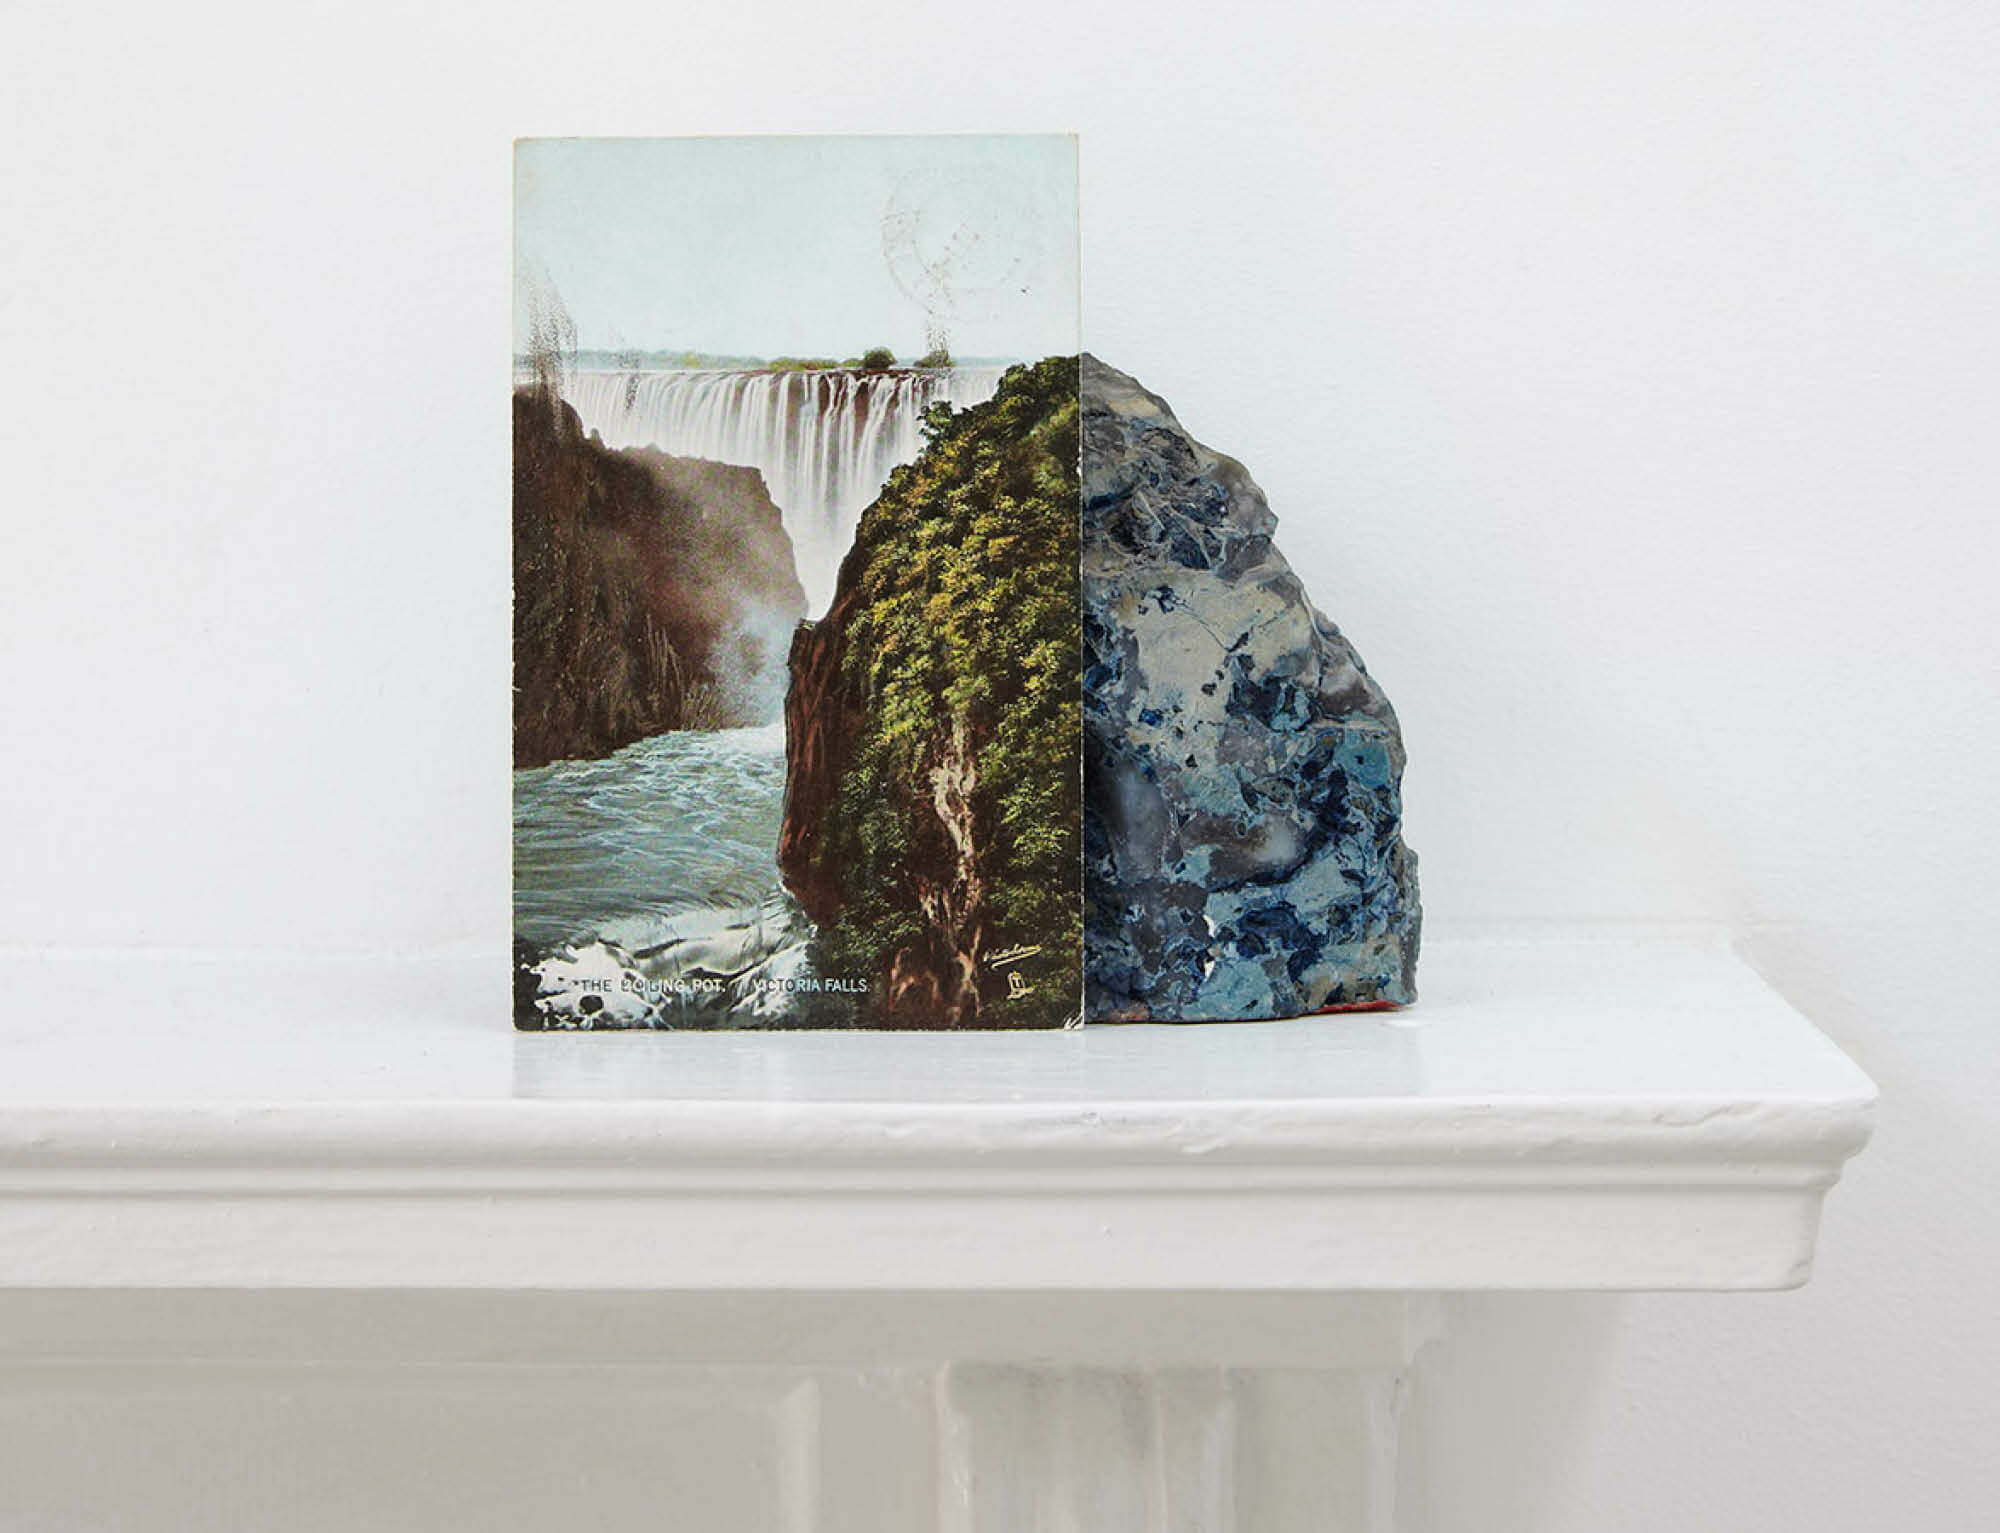 Image: Stuart Whipps, A postcard of Victoria Falls leaning against a geological sample from John Latham's mantlepiece, C-Print, 31.25cm x 25cm, 2013 (John Latham at 100: African Incidentalism 0)